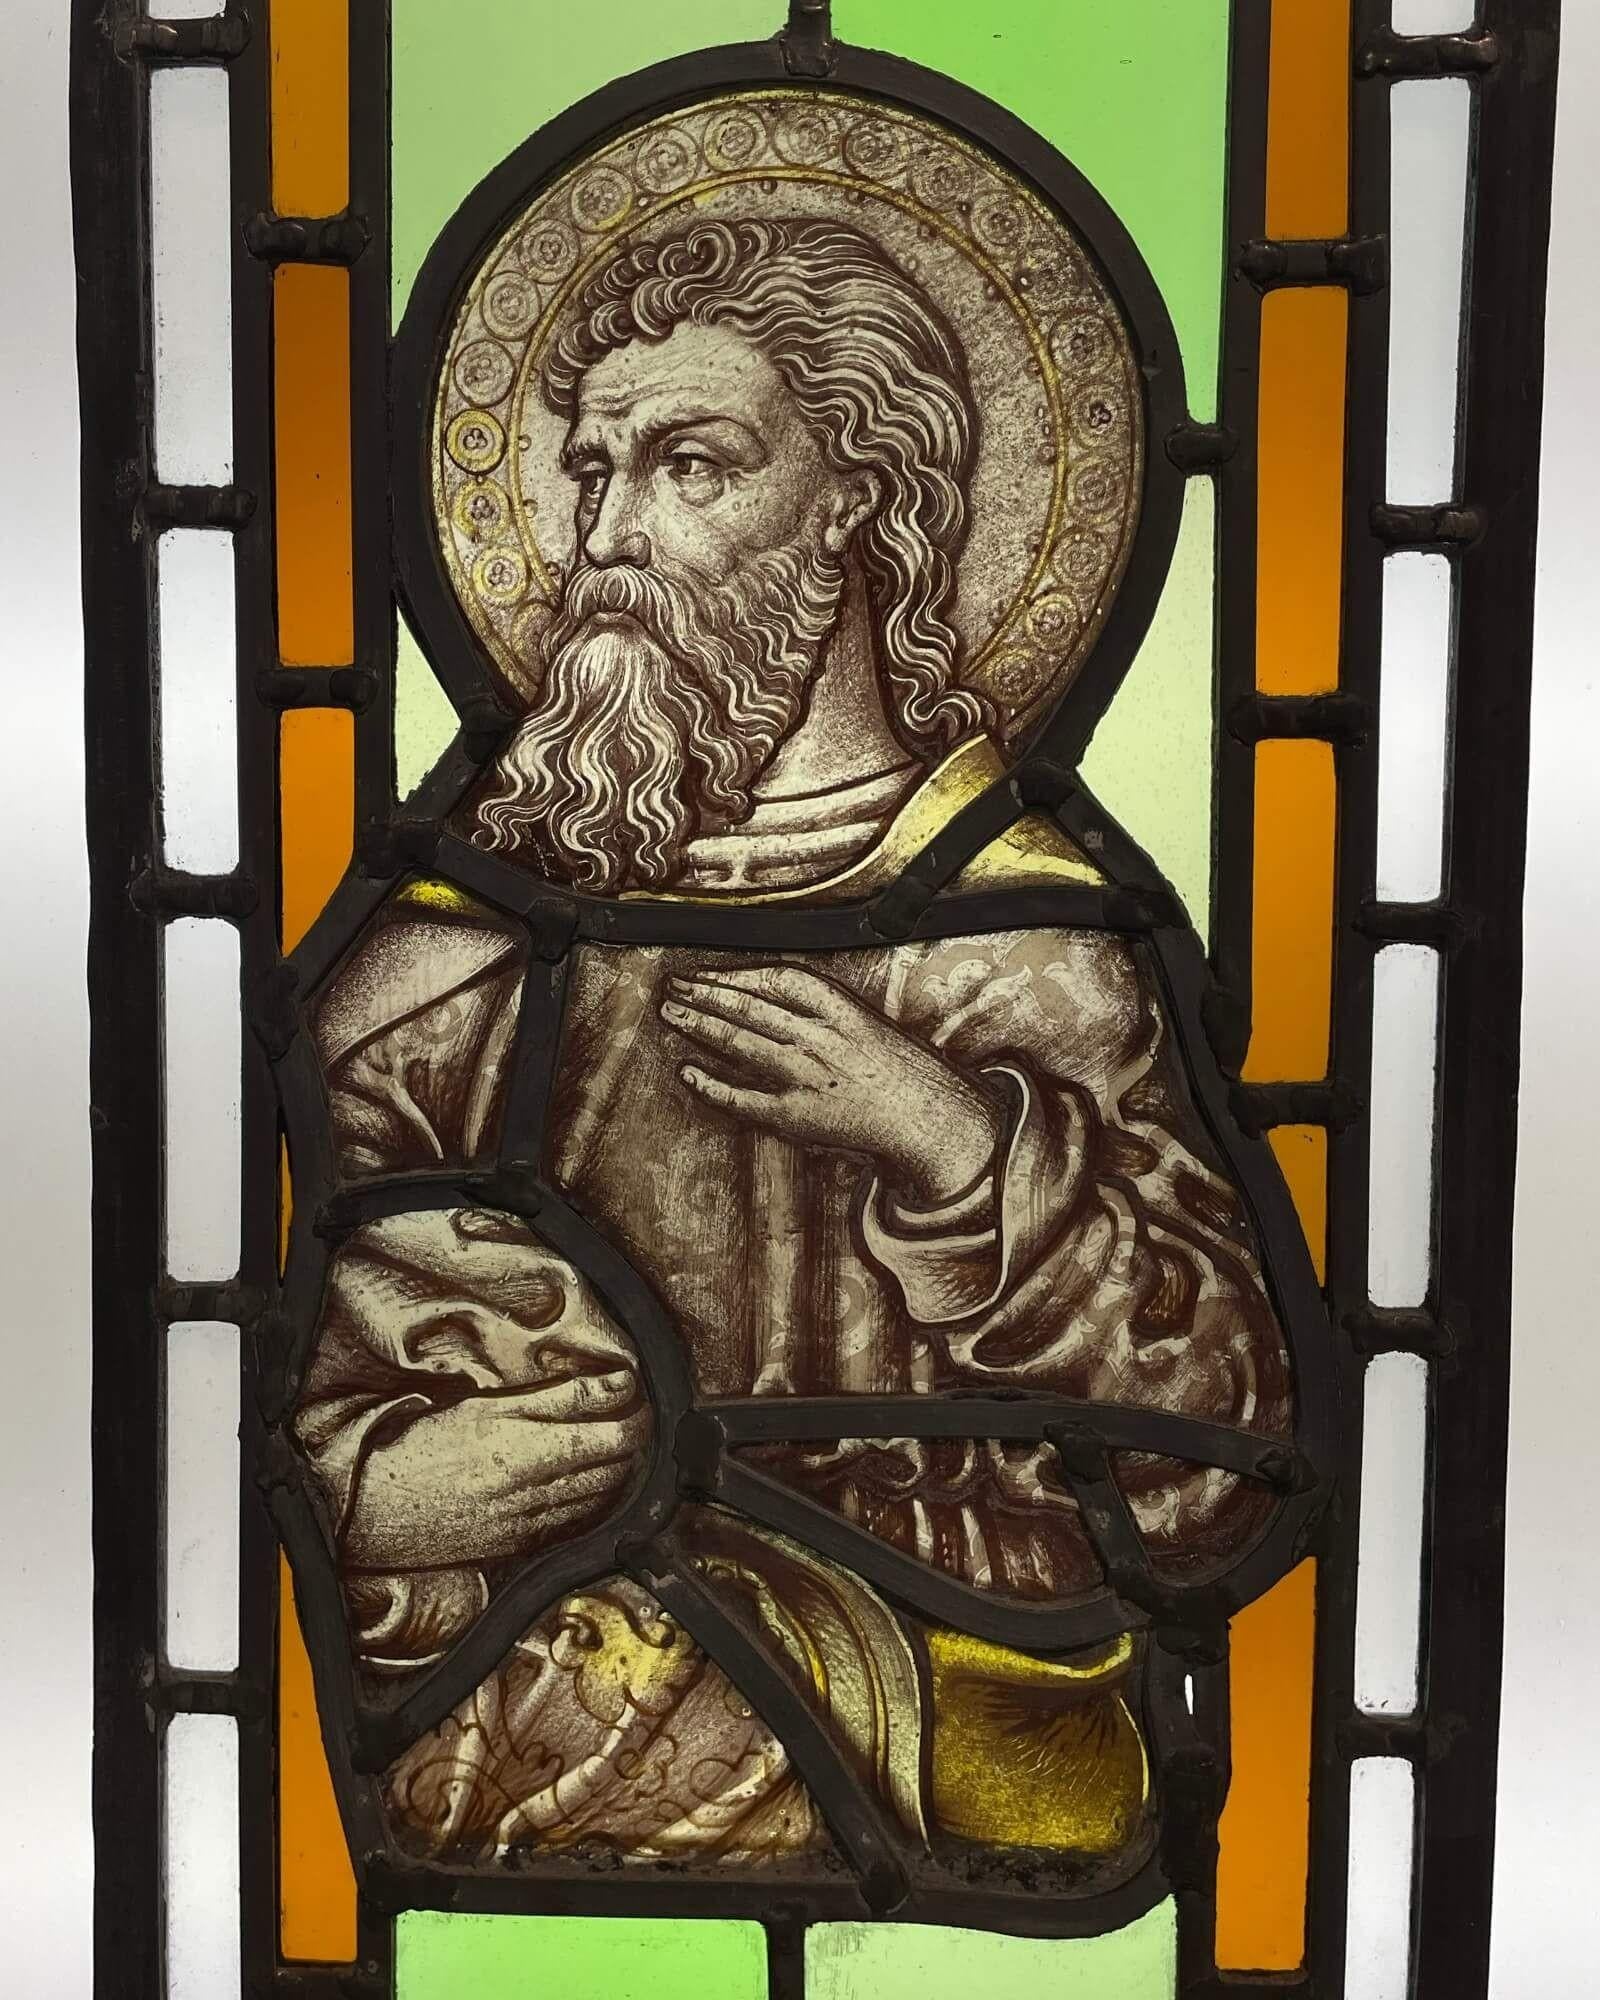 A pair of antique ecclesiastical stained glass windows circa 1850 depicting two saintly figures: one a bearded, long-haired man and the other a young boy with locks of blonde hair. Each is set into a backdrop of vibrant green and orange glass,